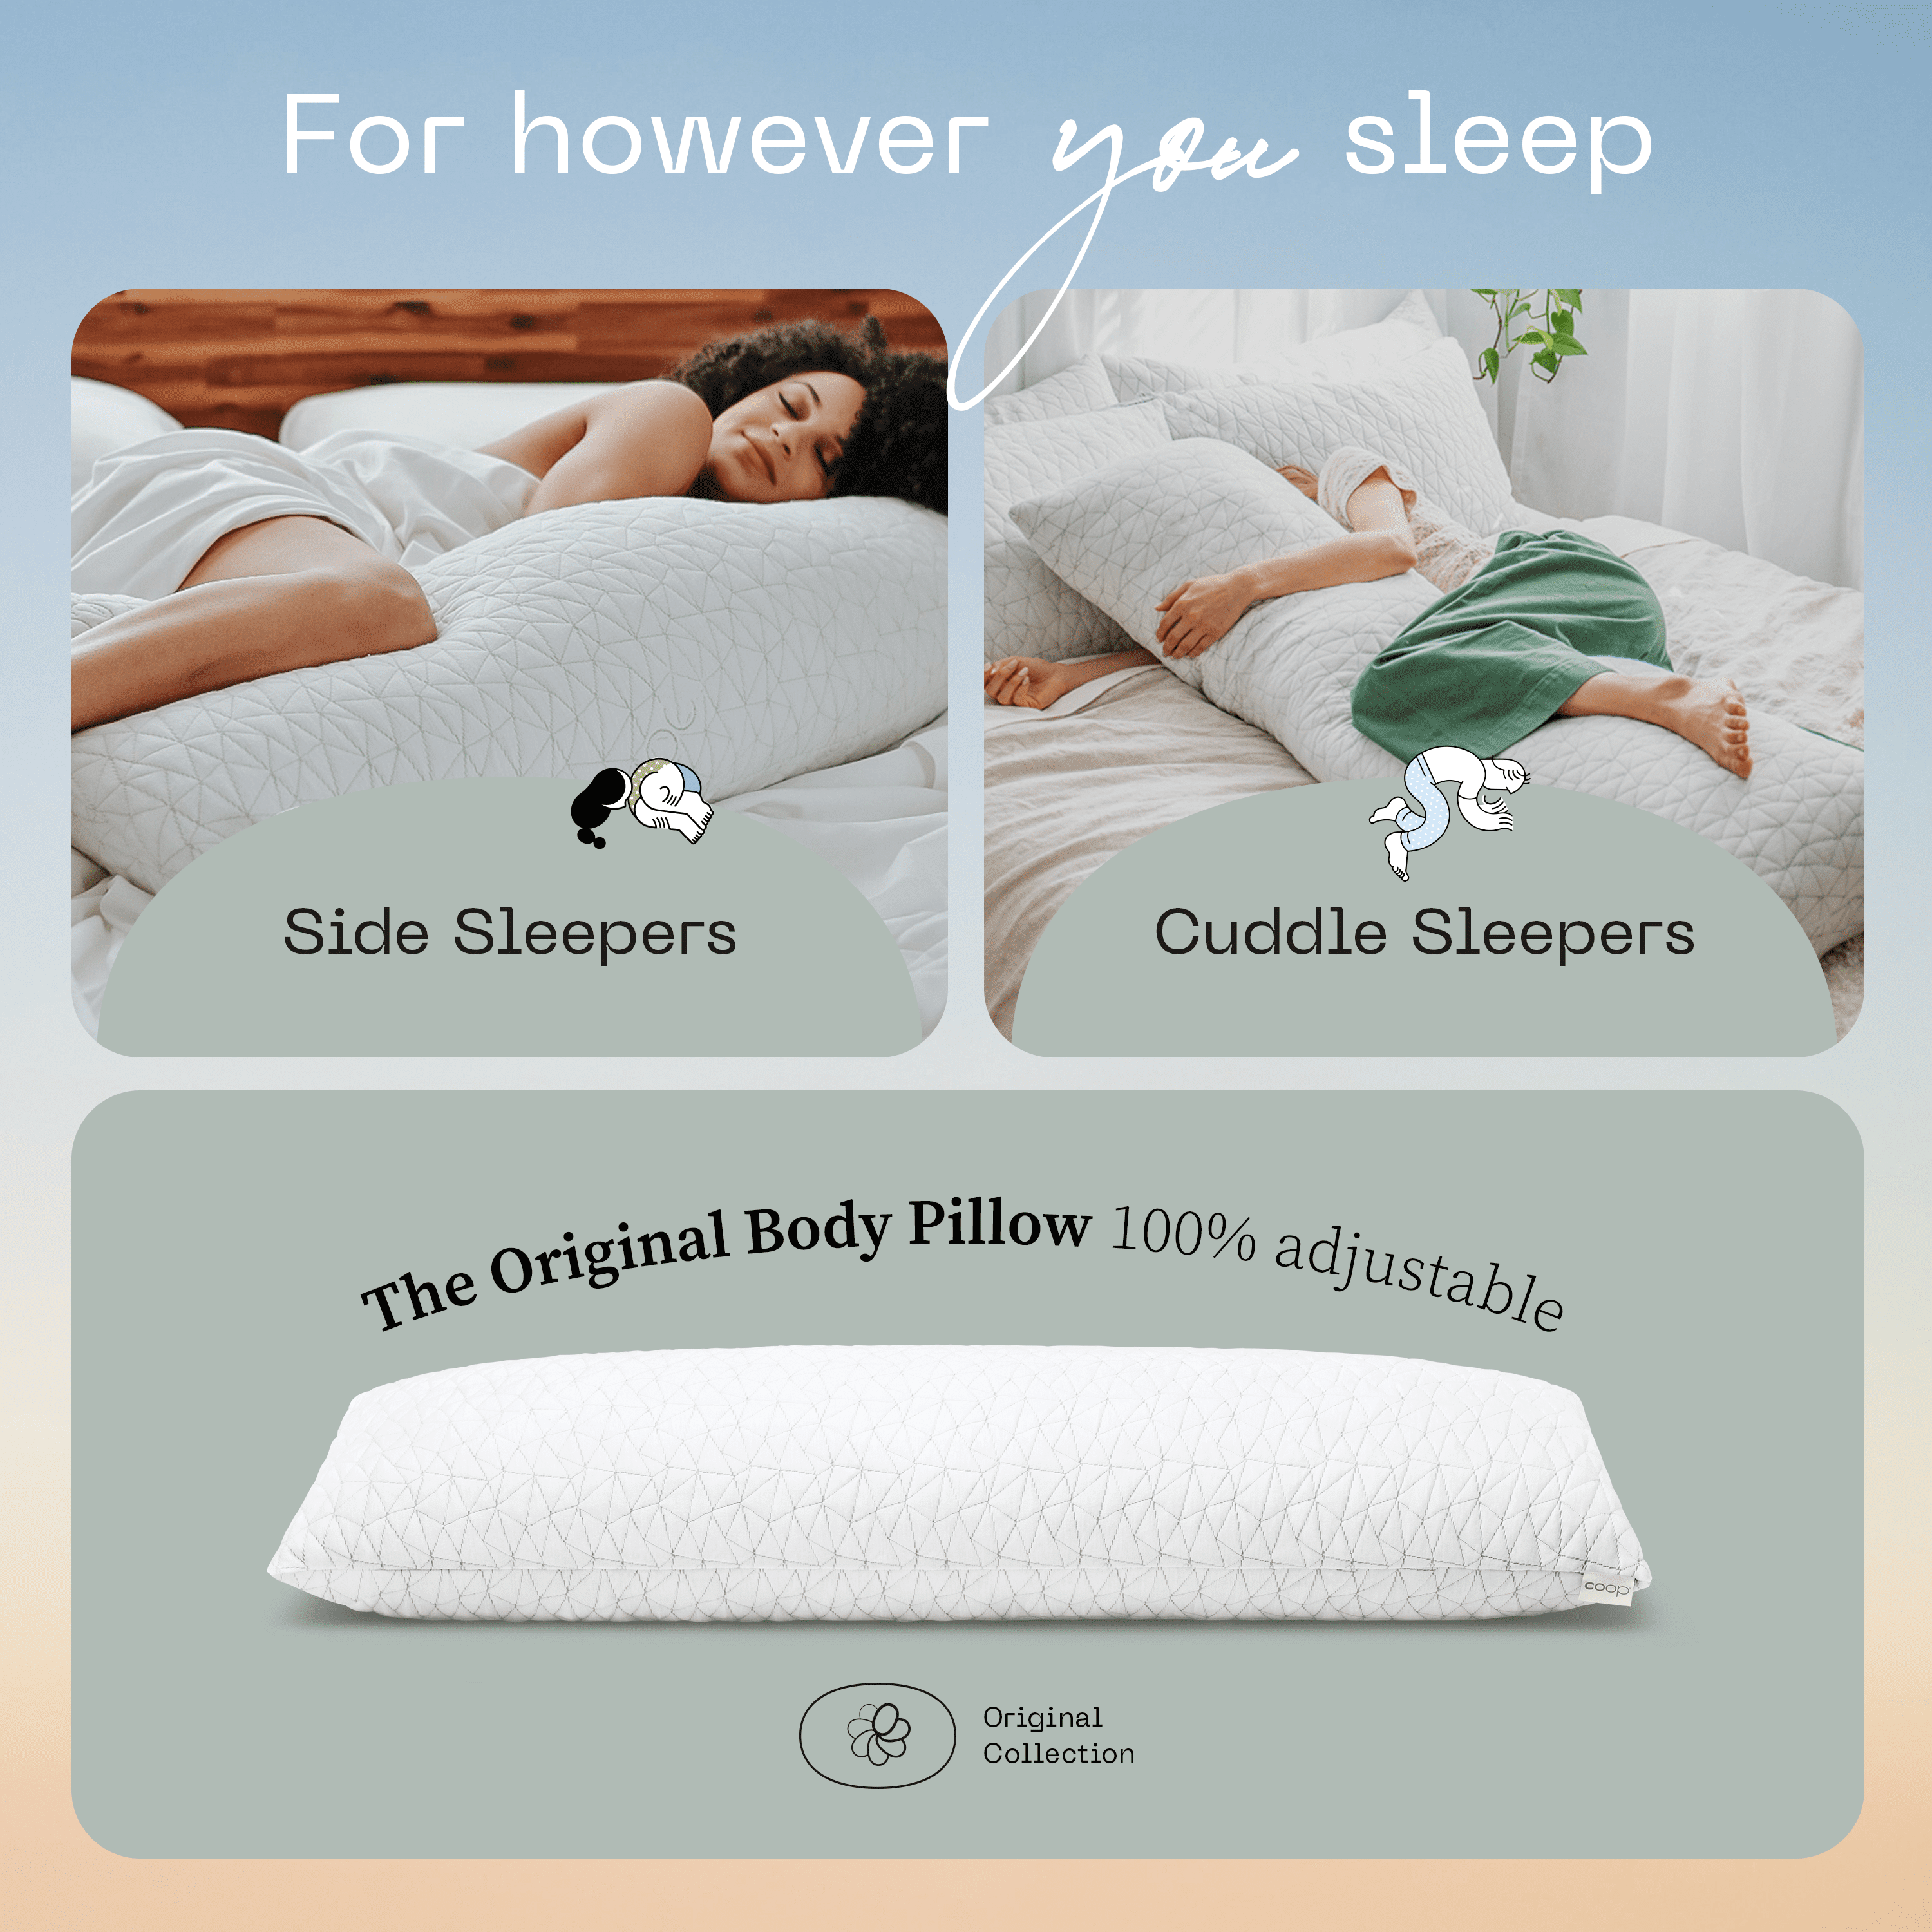 How to Use a Body Pillow – Coop Sleep Goods